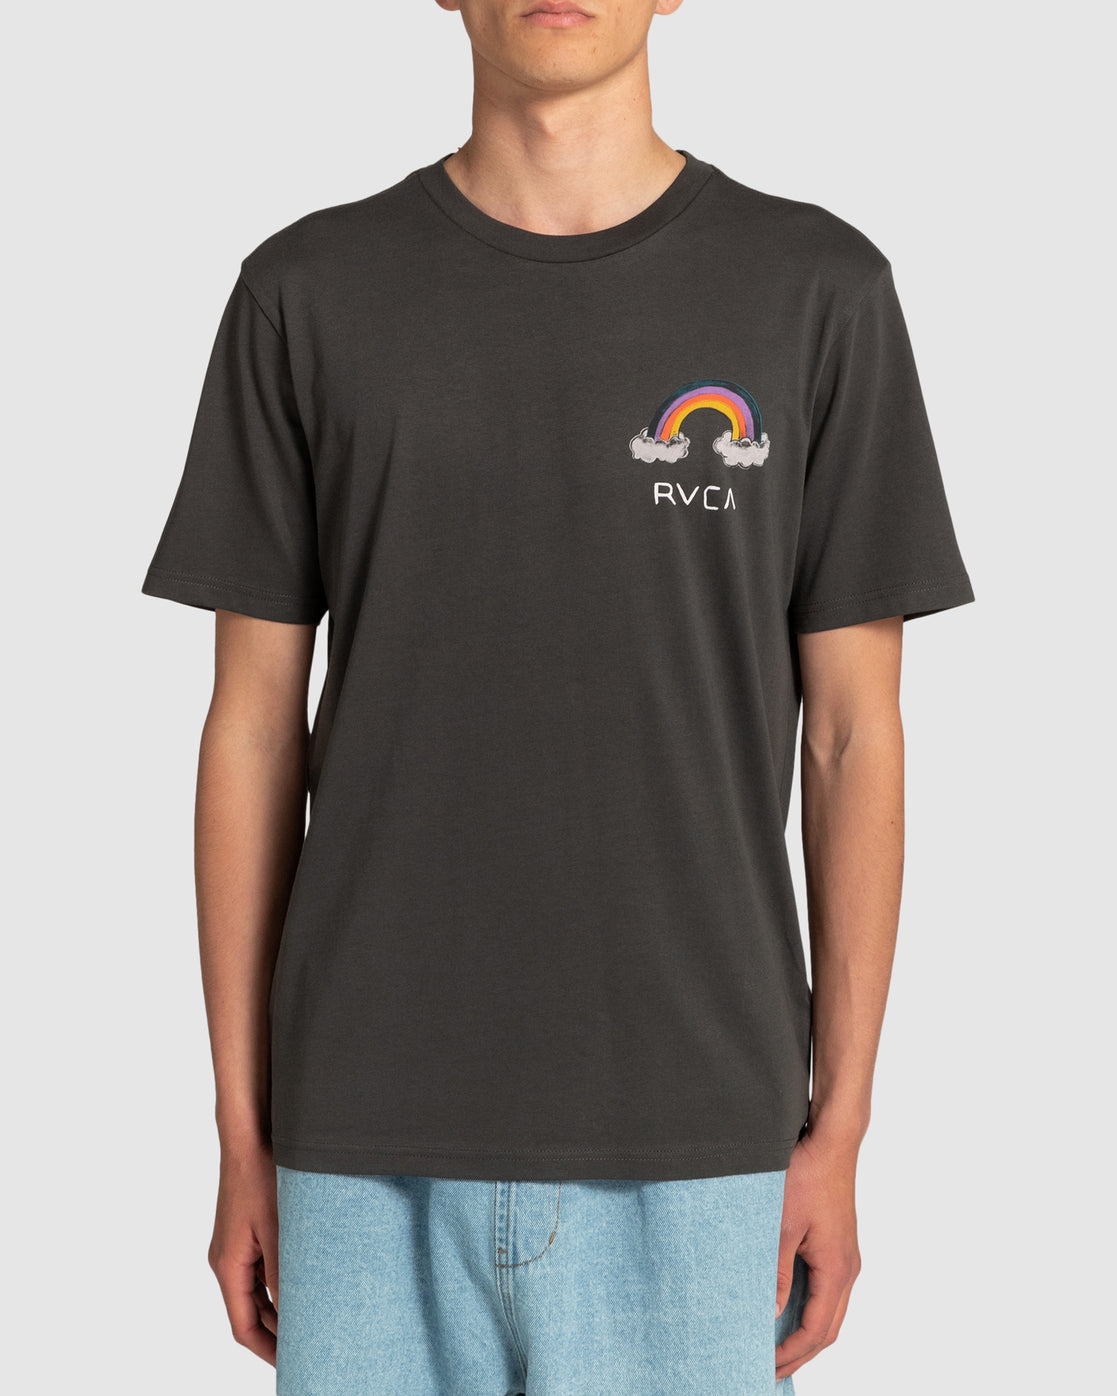 RVCA RAINBOW CONNECTION SS TEE - Pirate Black